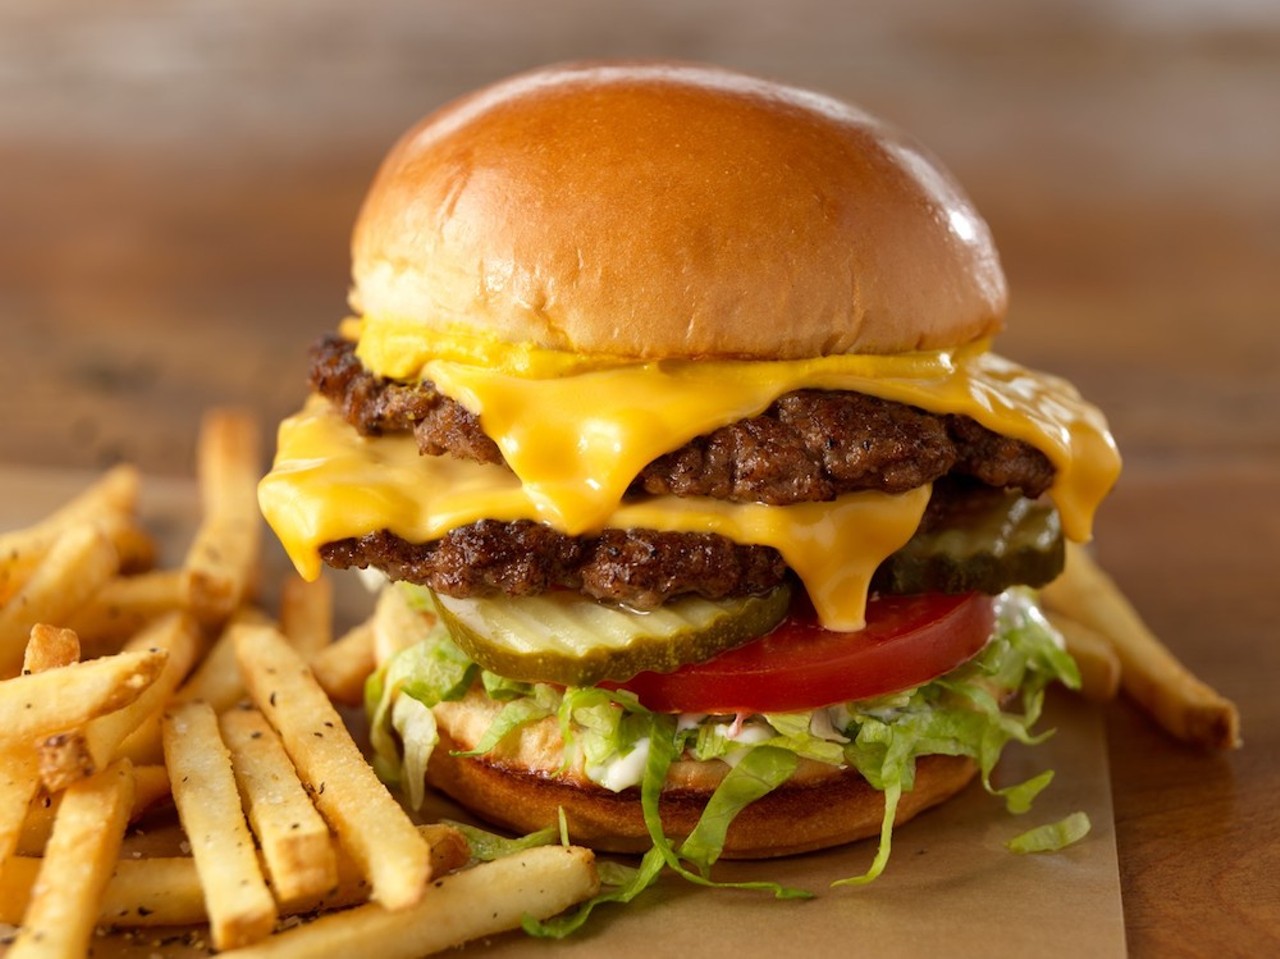 Buffalo Wild Wings will also be offering a &#147;Southwestern Black Bean Burger&#148; made with a black bean patty dressed with cheddar cheese, avocado smash, shredded iceberg lettuce, tomato, onion, pickles, and southwestern ranch on a challah bun.